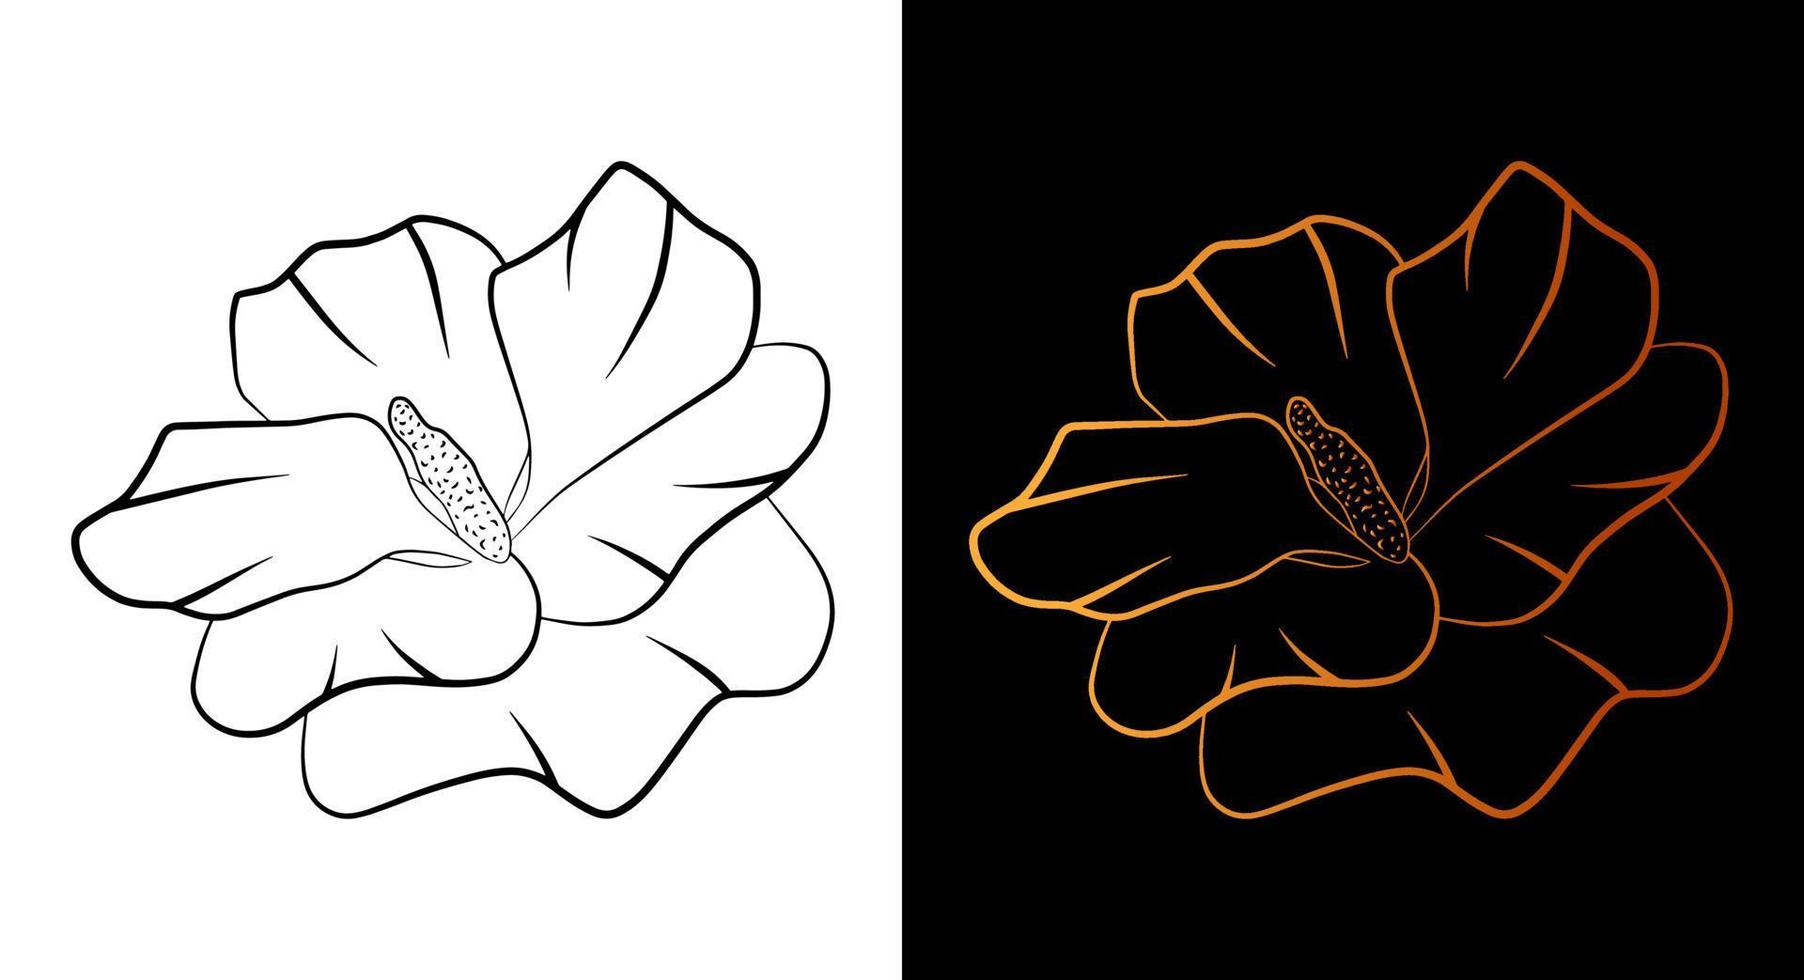 Flower outline icon, simple doodle sketch line art style, black and gold floral botany set. Beauty elegant logo design element. Graphic isolated symbol drawing. Flat shape, wedding tattoo print card. vector